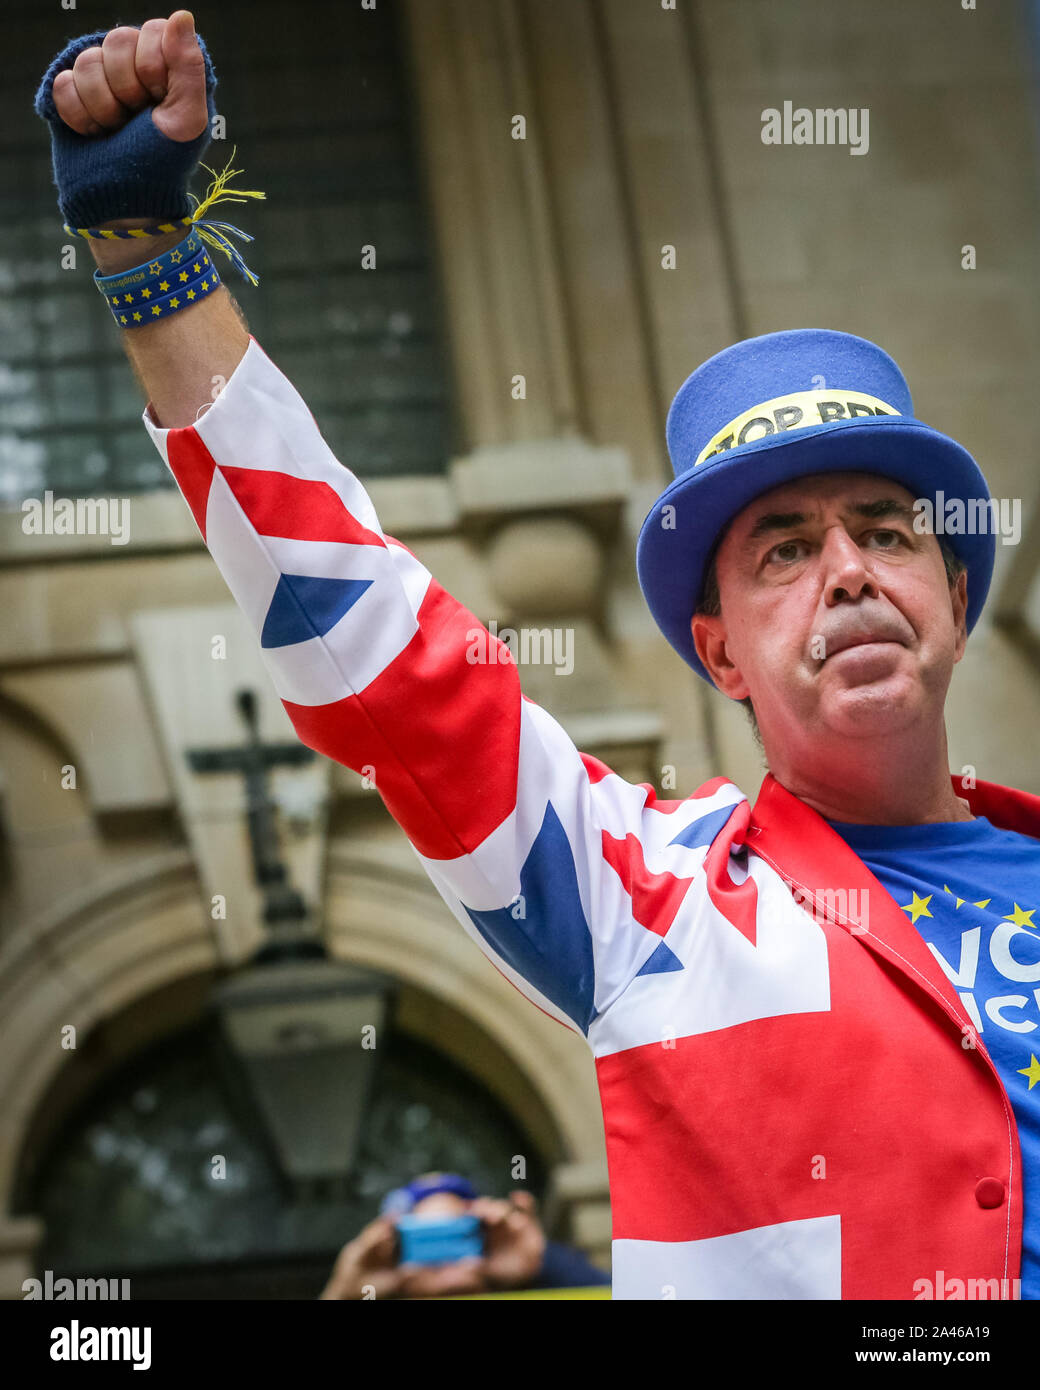 London, UK, 12 Oct 2019. Westminster's 'Stop Brexit Man', Steven Bray, is a speaker at the rally. Protesters rally in Westminster to defend the rights of the 5 million+ European Citizens living in the UK and British Citizens in the EU who are directly affected by Brexit. Key speaker and rally sites include outside Europe House, the European Parliament UK offices, The Home Office and 55 Tufton Street, base of several Eurosceptic and Brexit-related think tanks. Stock Photo